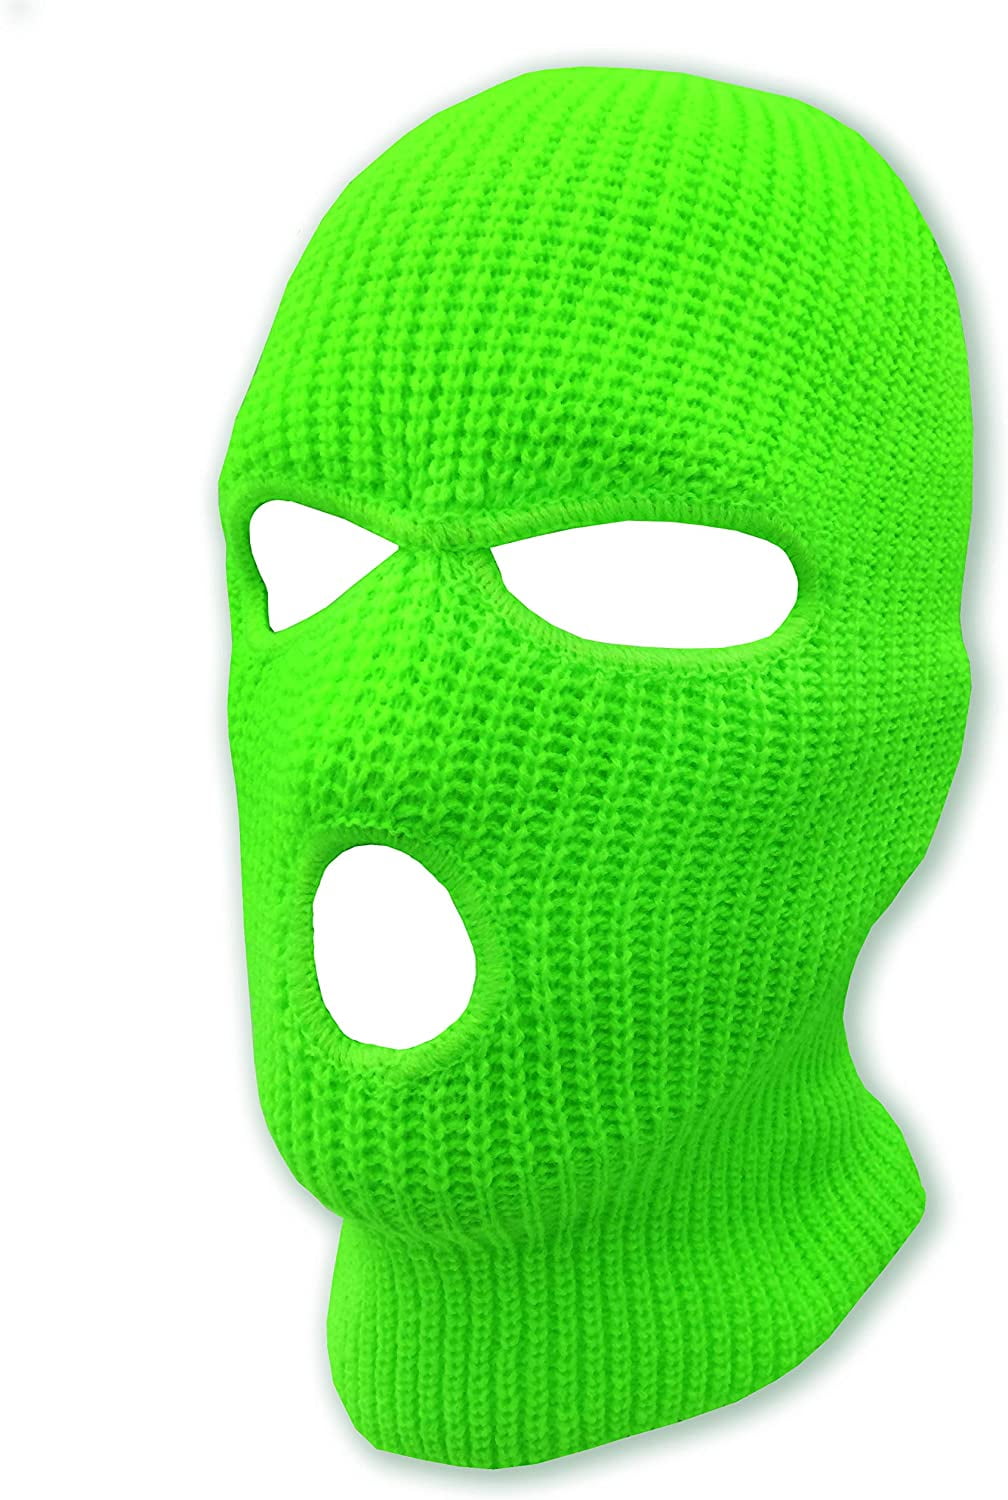 GRNSHTS Unisex 3 Hole Winter Knitted Mask, Outdoor Sports Full Face ...